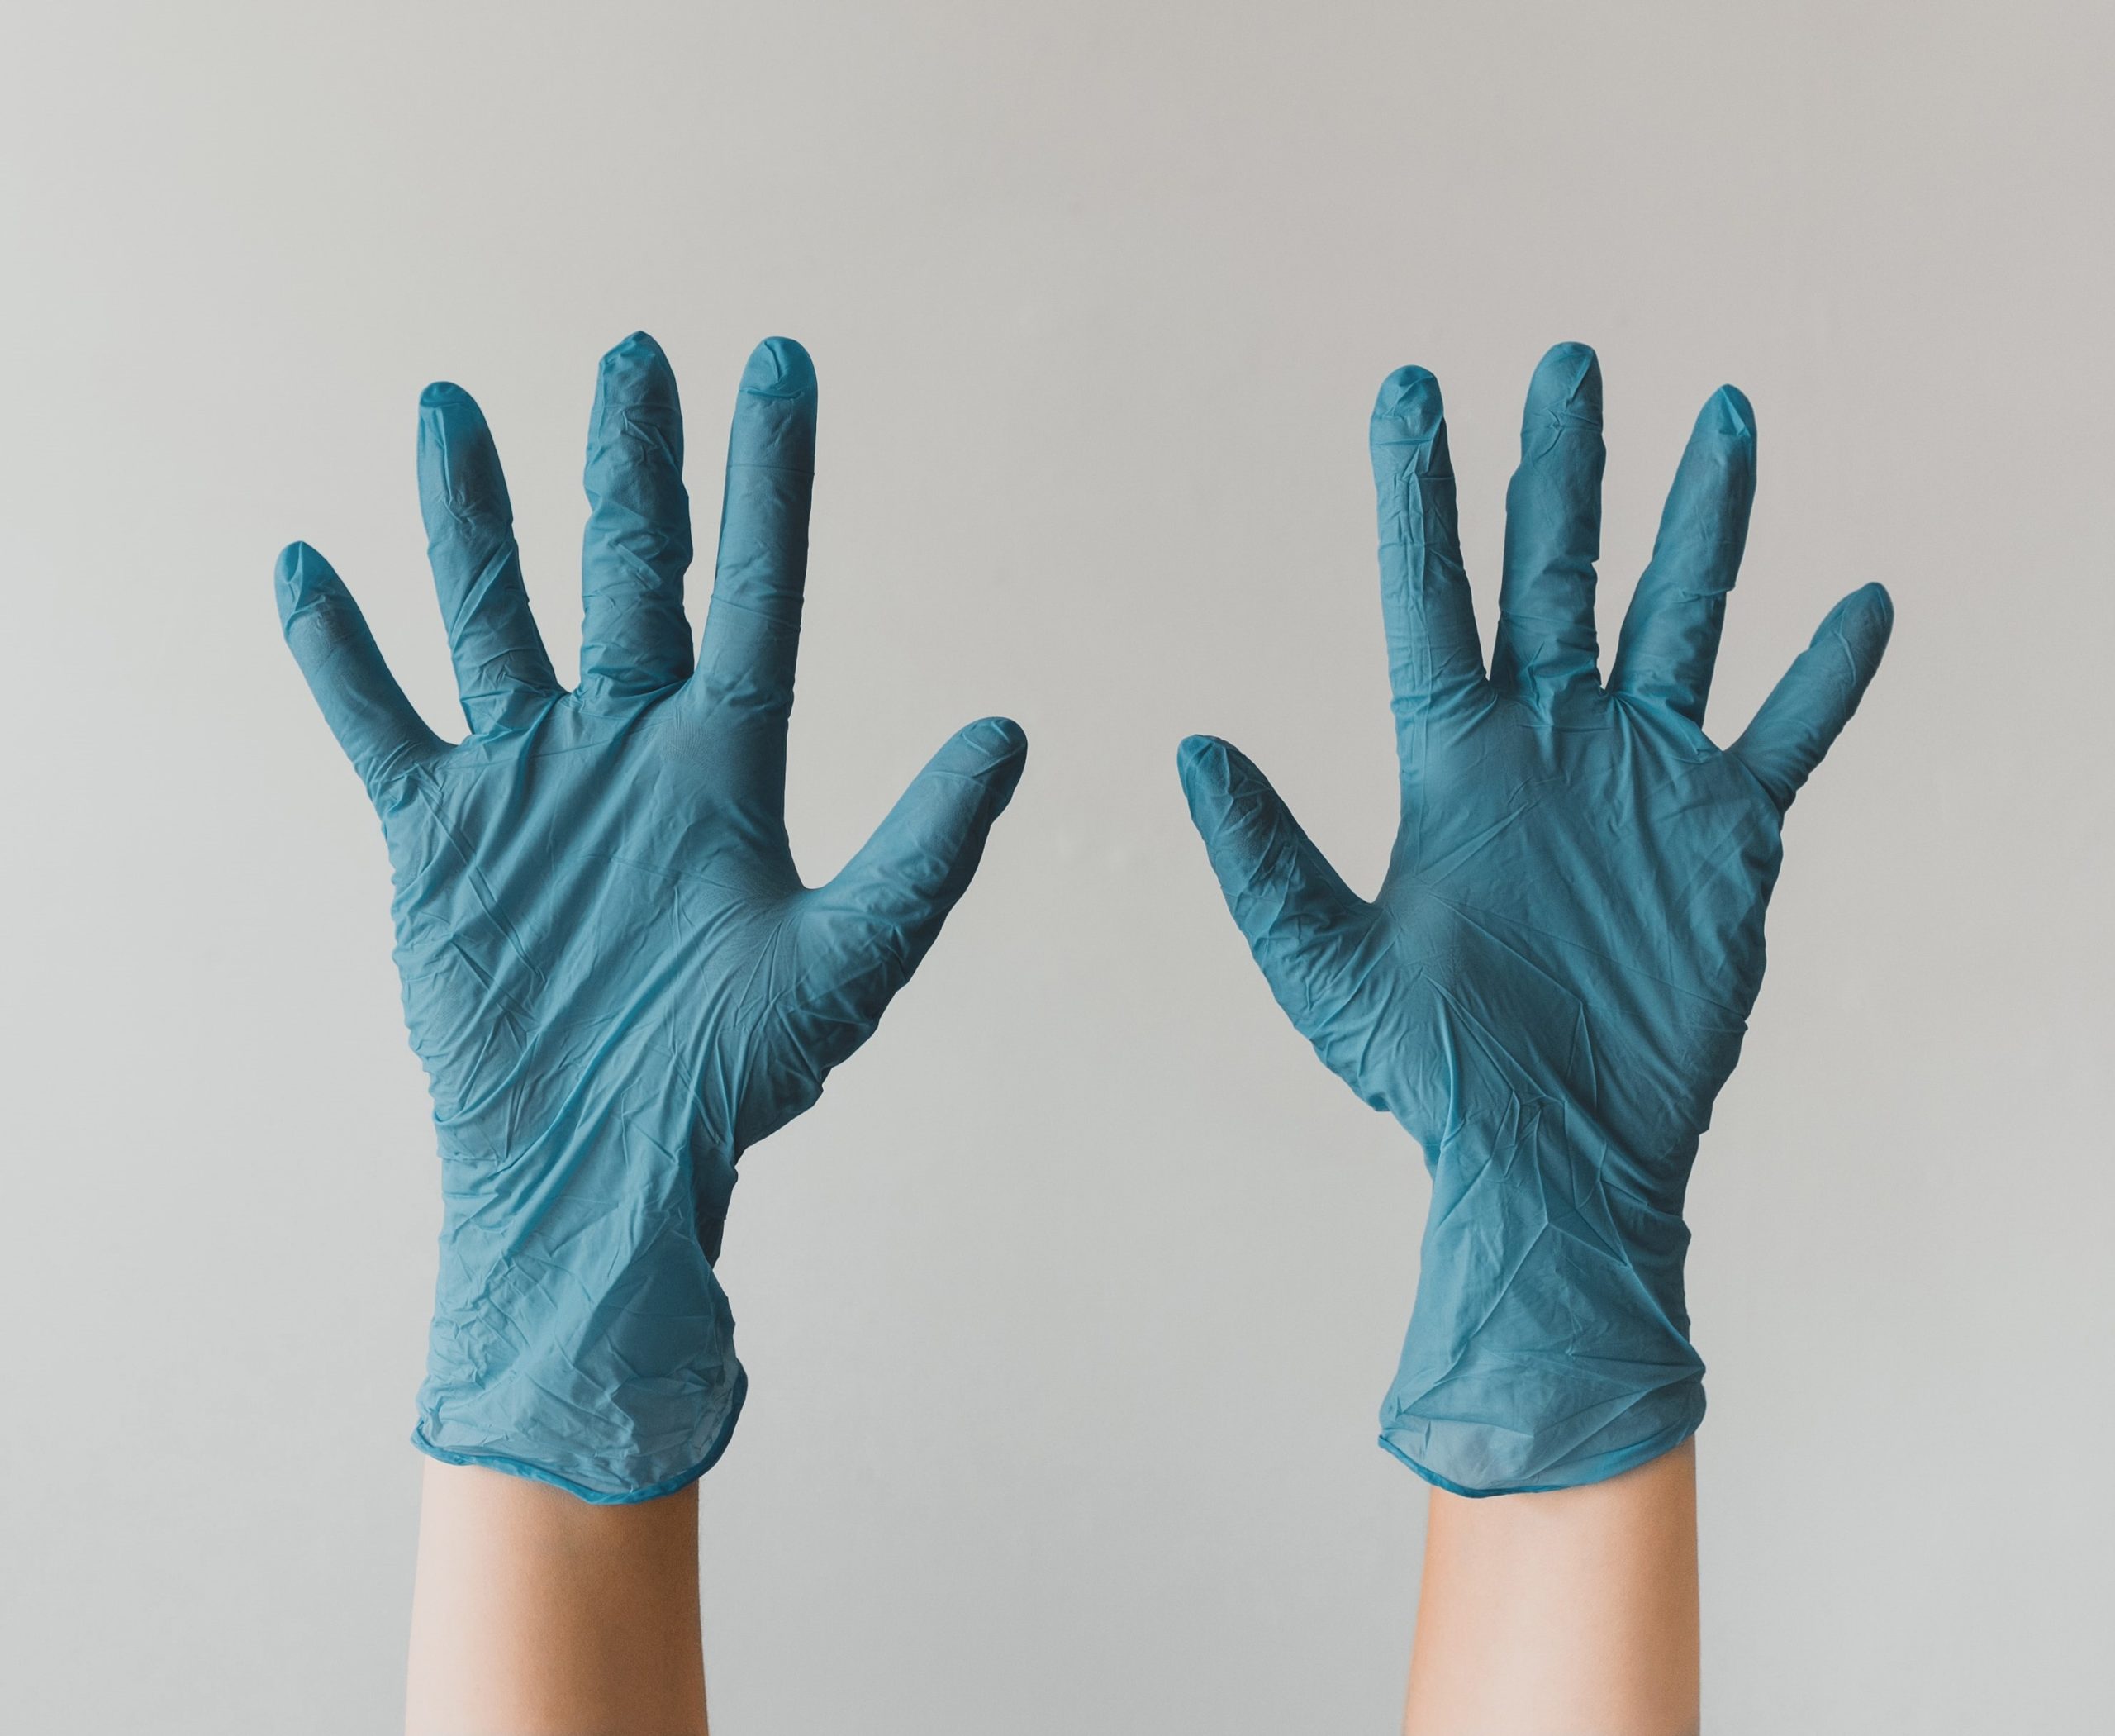 An image of a White person wearing blue medical gloves with their fingers spread wide.